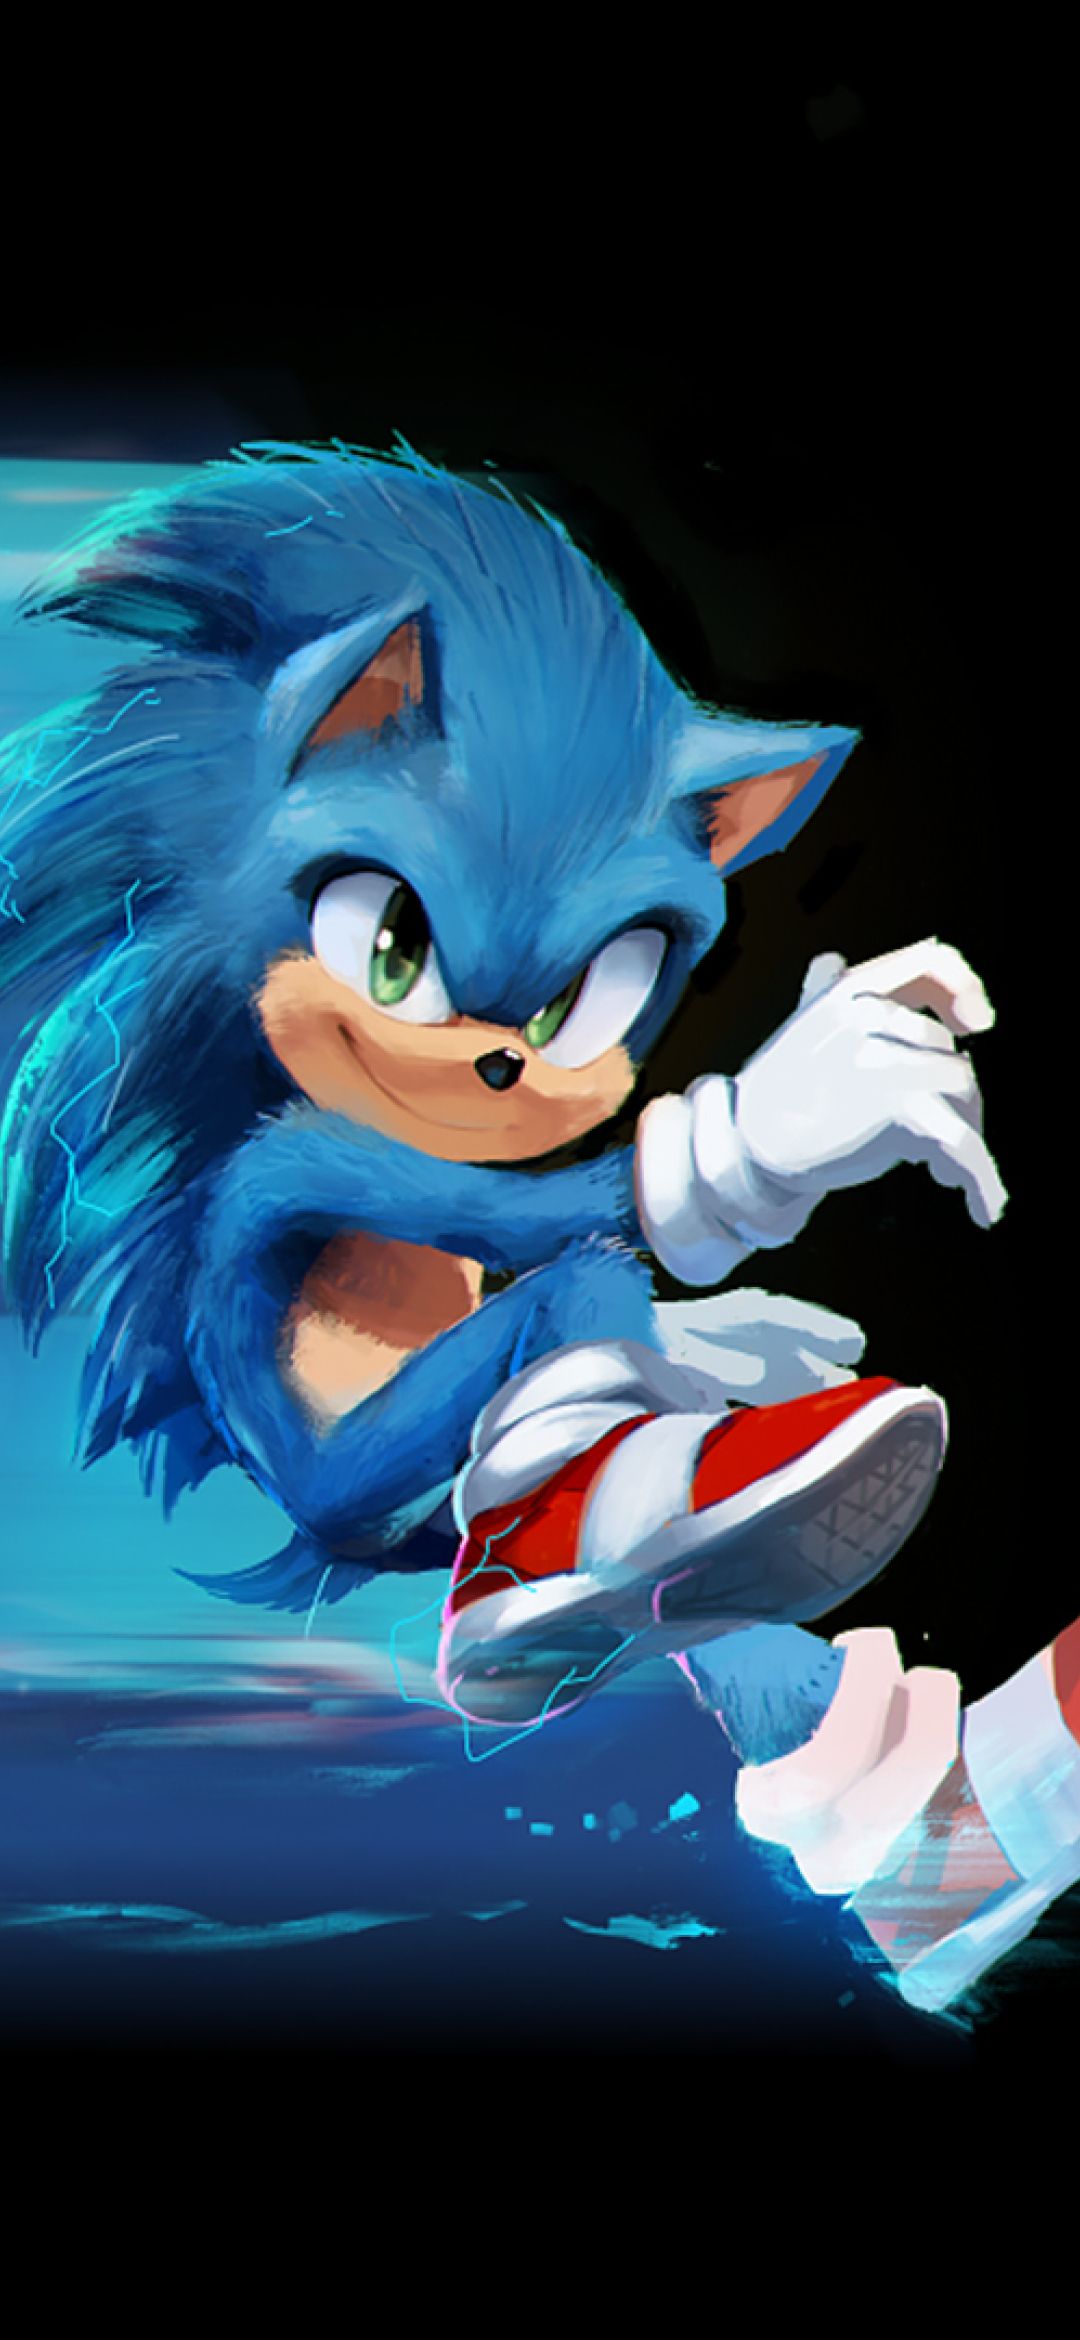 Sonic the Hedgehog Artwork 1080x2340 Resolution Wallpaper, HD Movies 4K Wallpaper, Image, Photo and Background